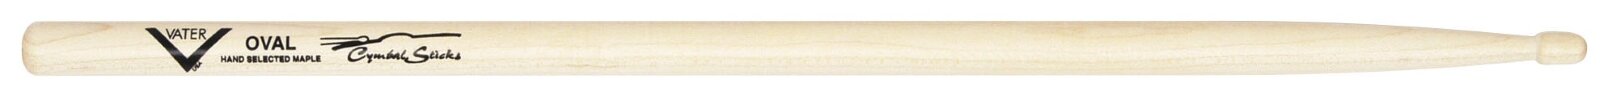 Vater Oval 5A : photo 1